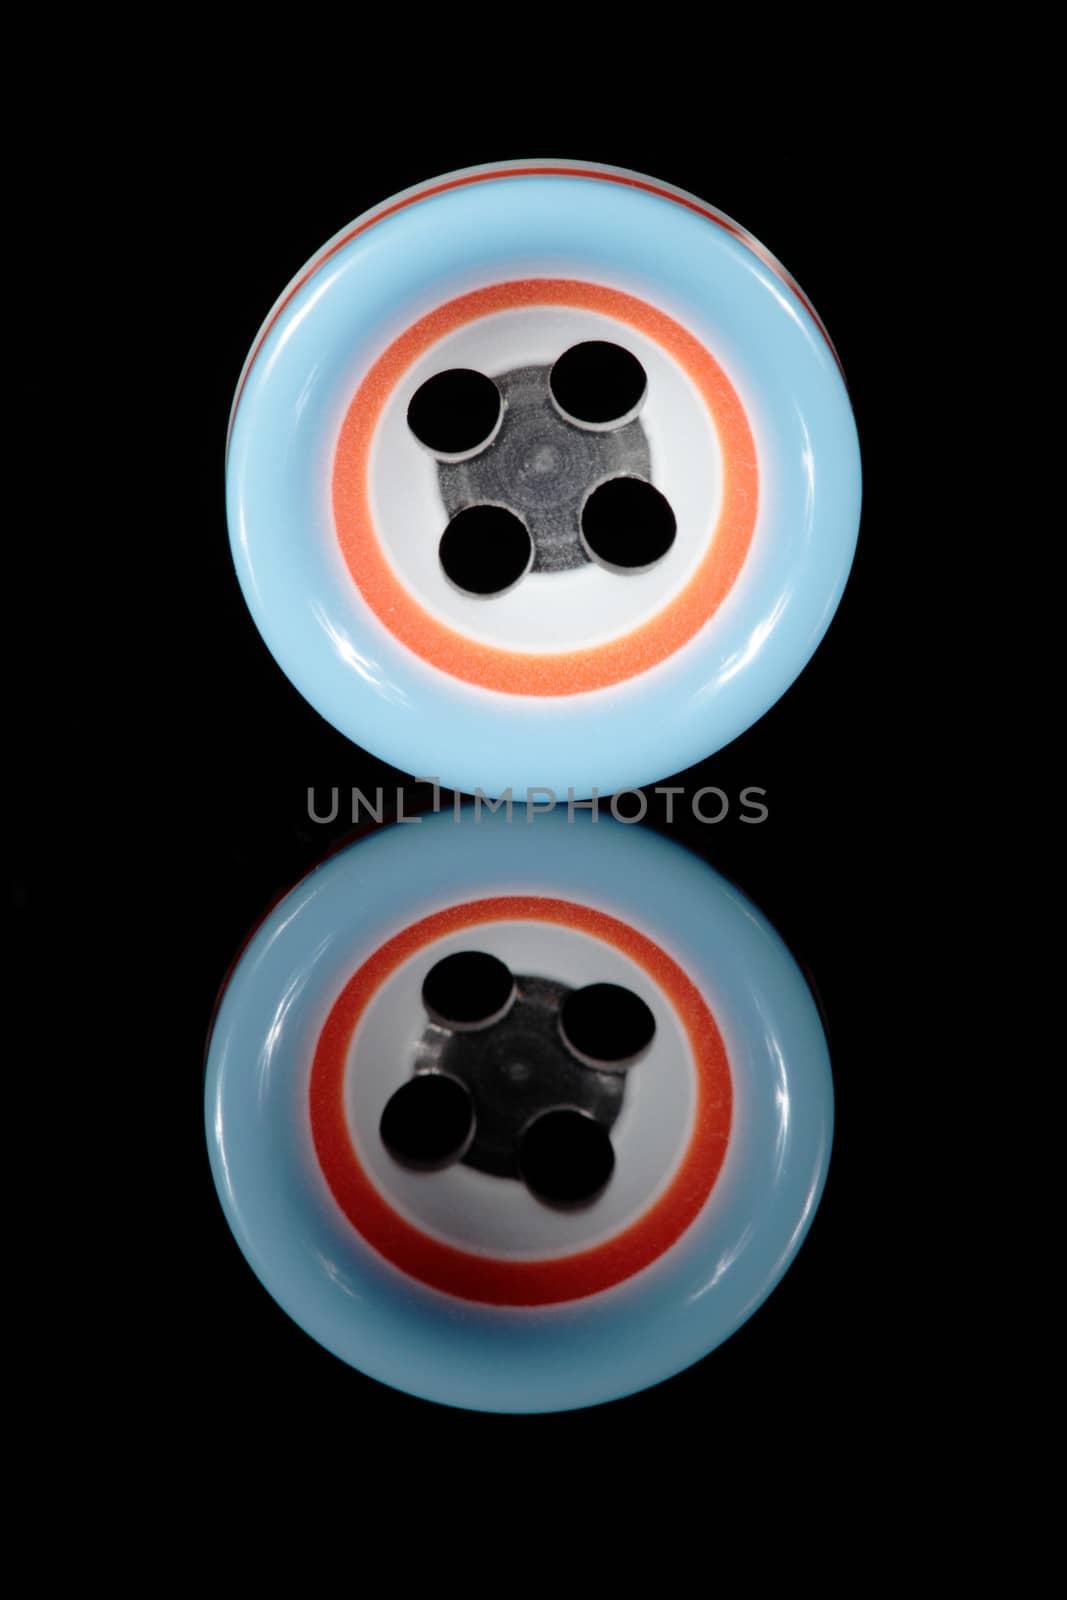 a colored button isolated in black